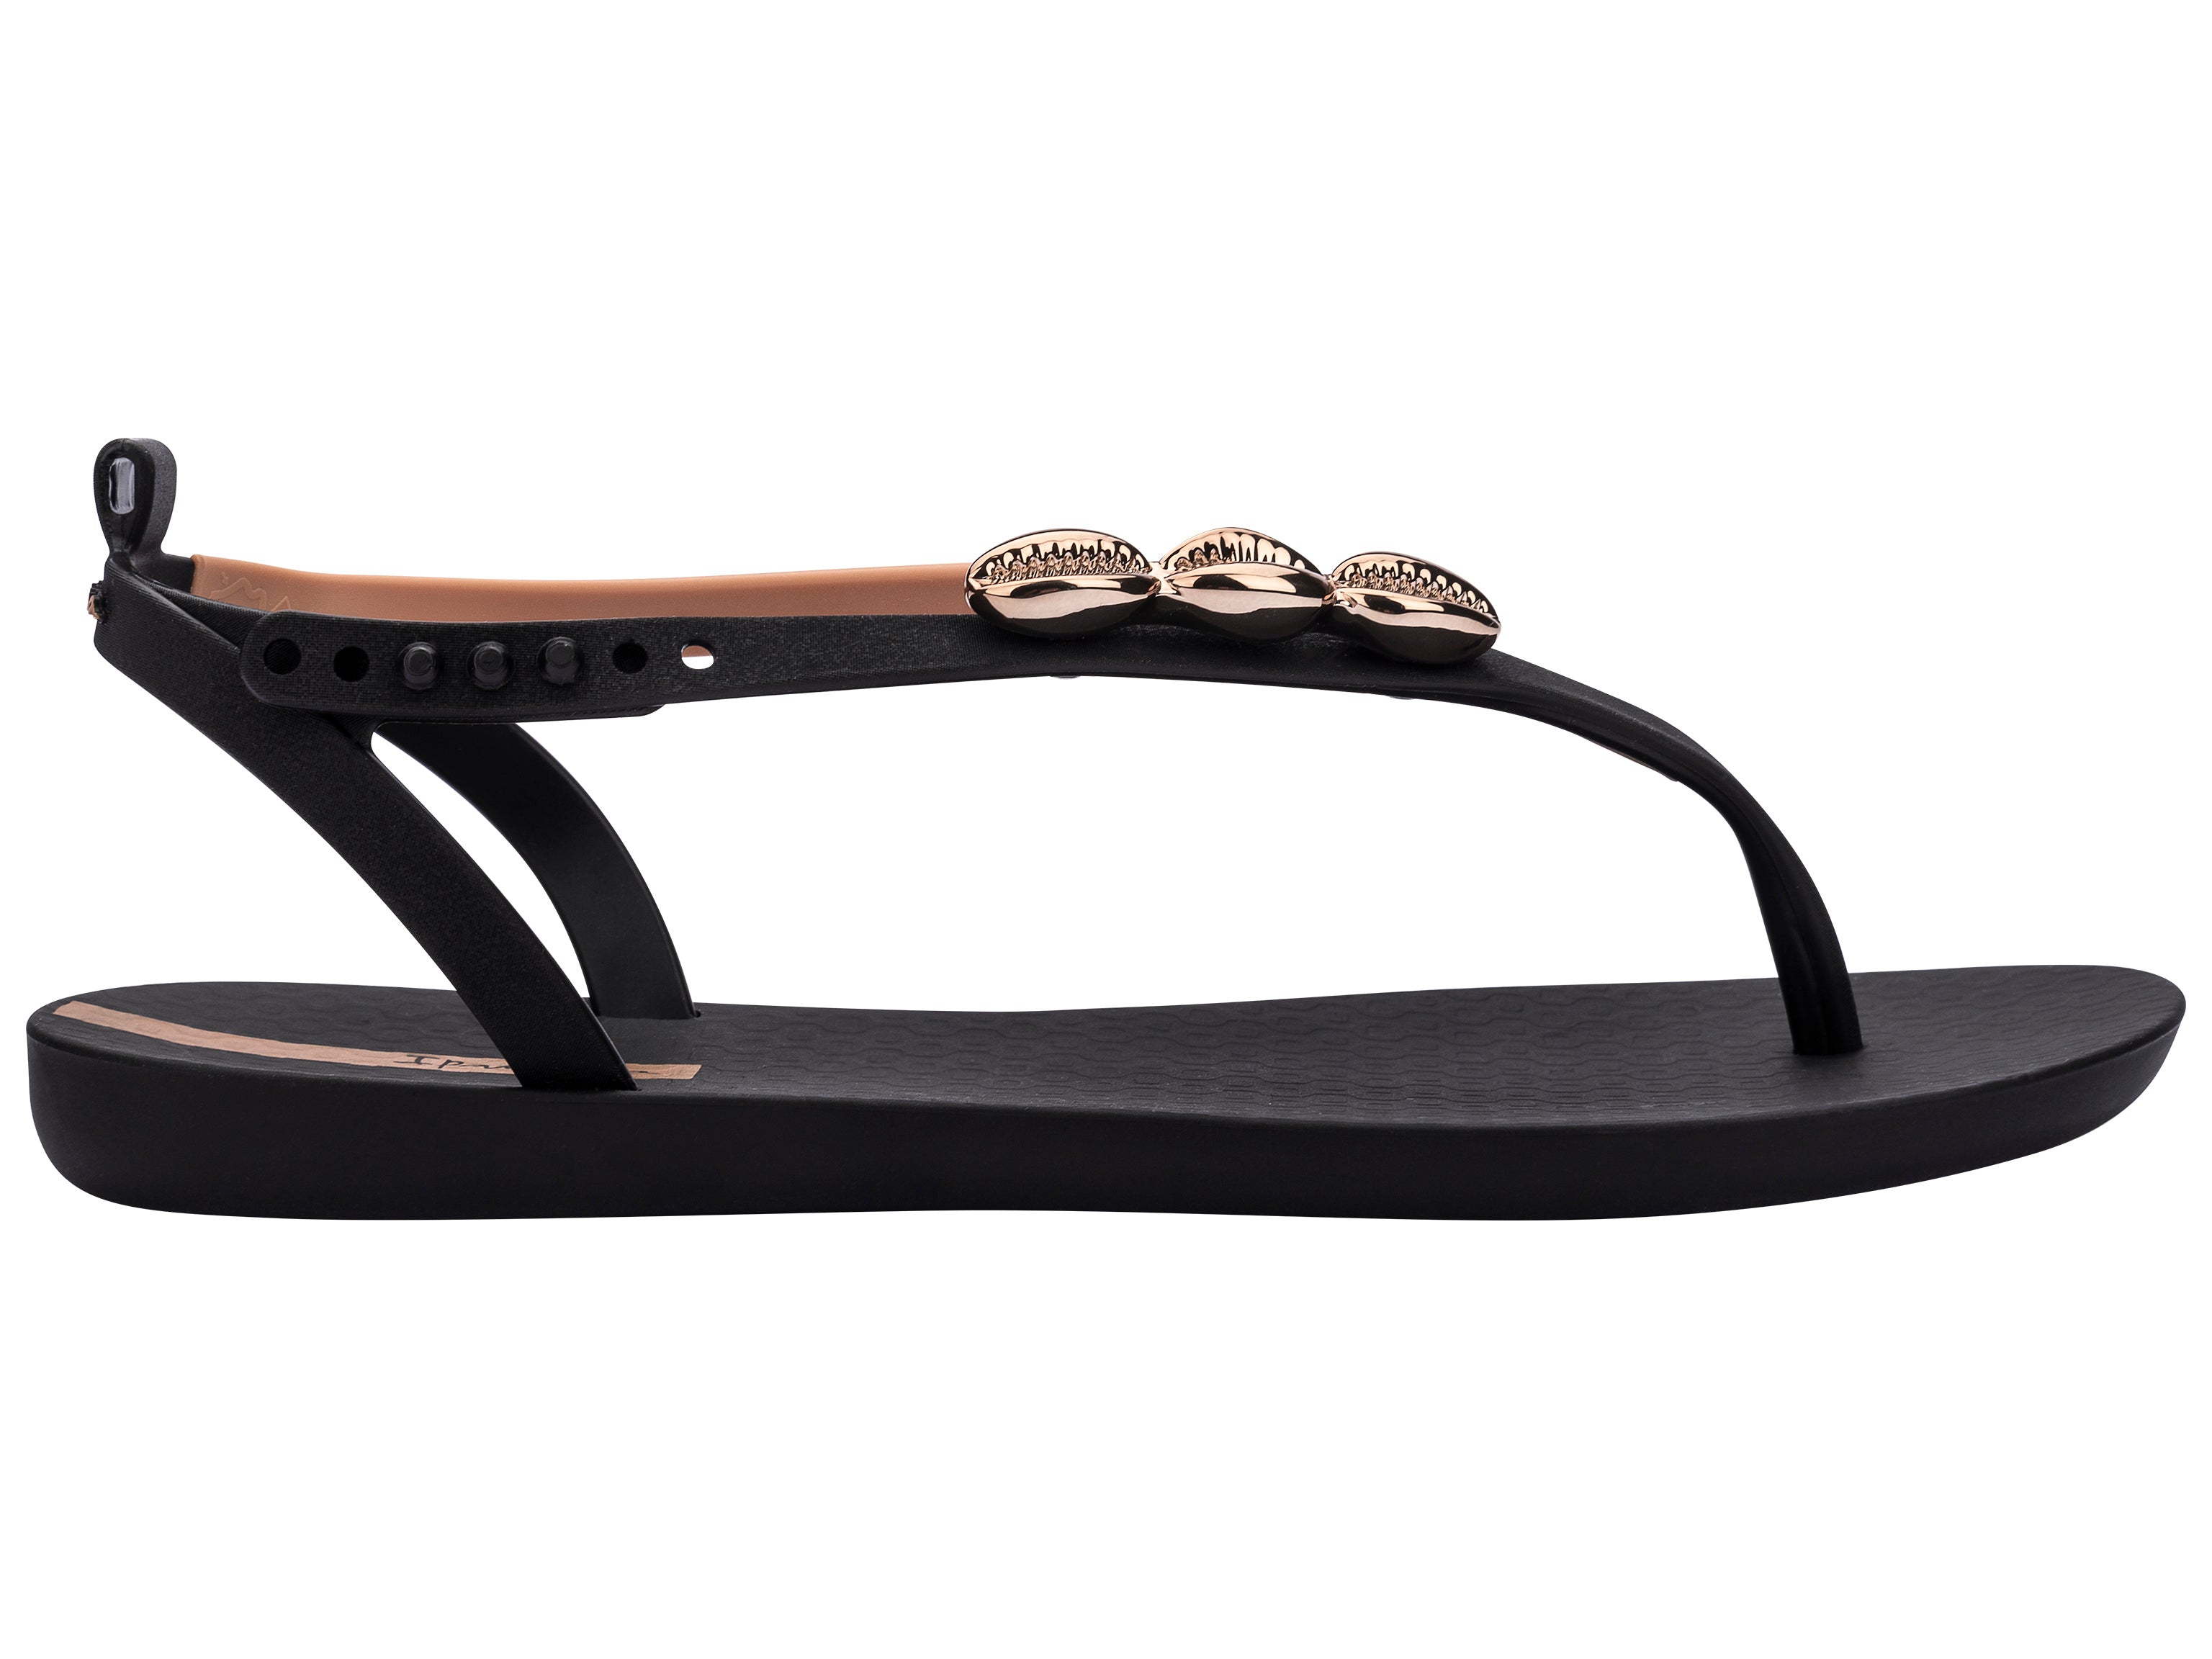 Outer side view of a black Ipanema Salty women's sandal with 3 gold shells on the strap.